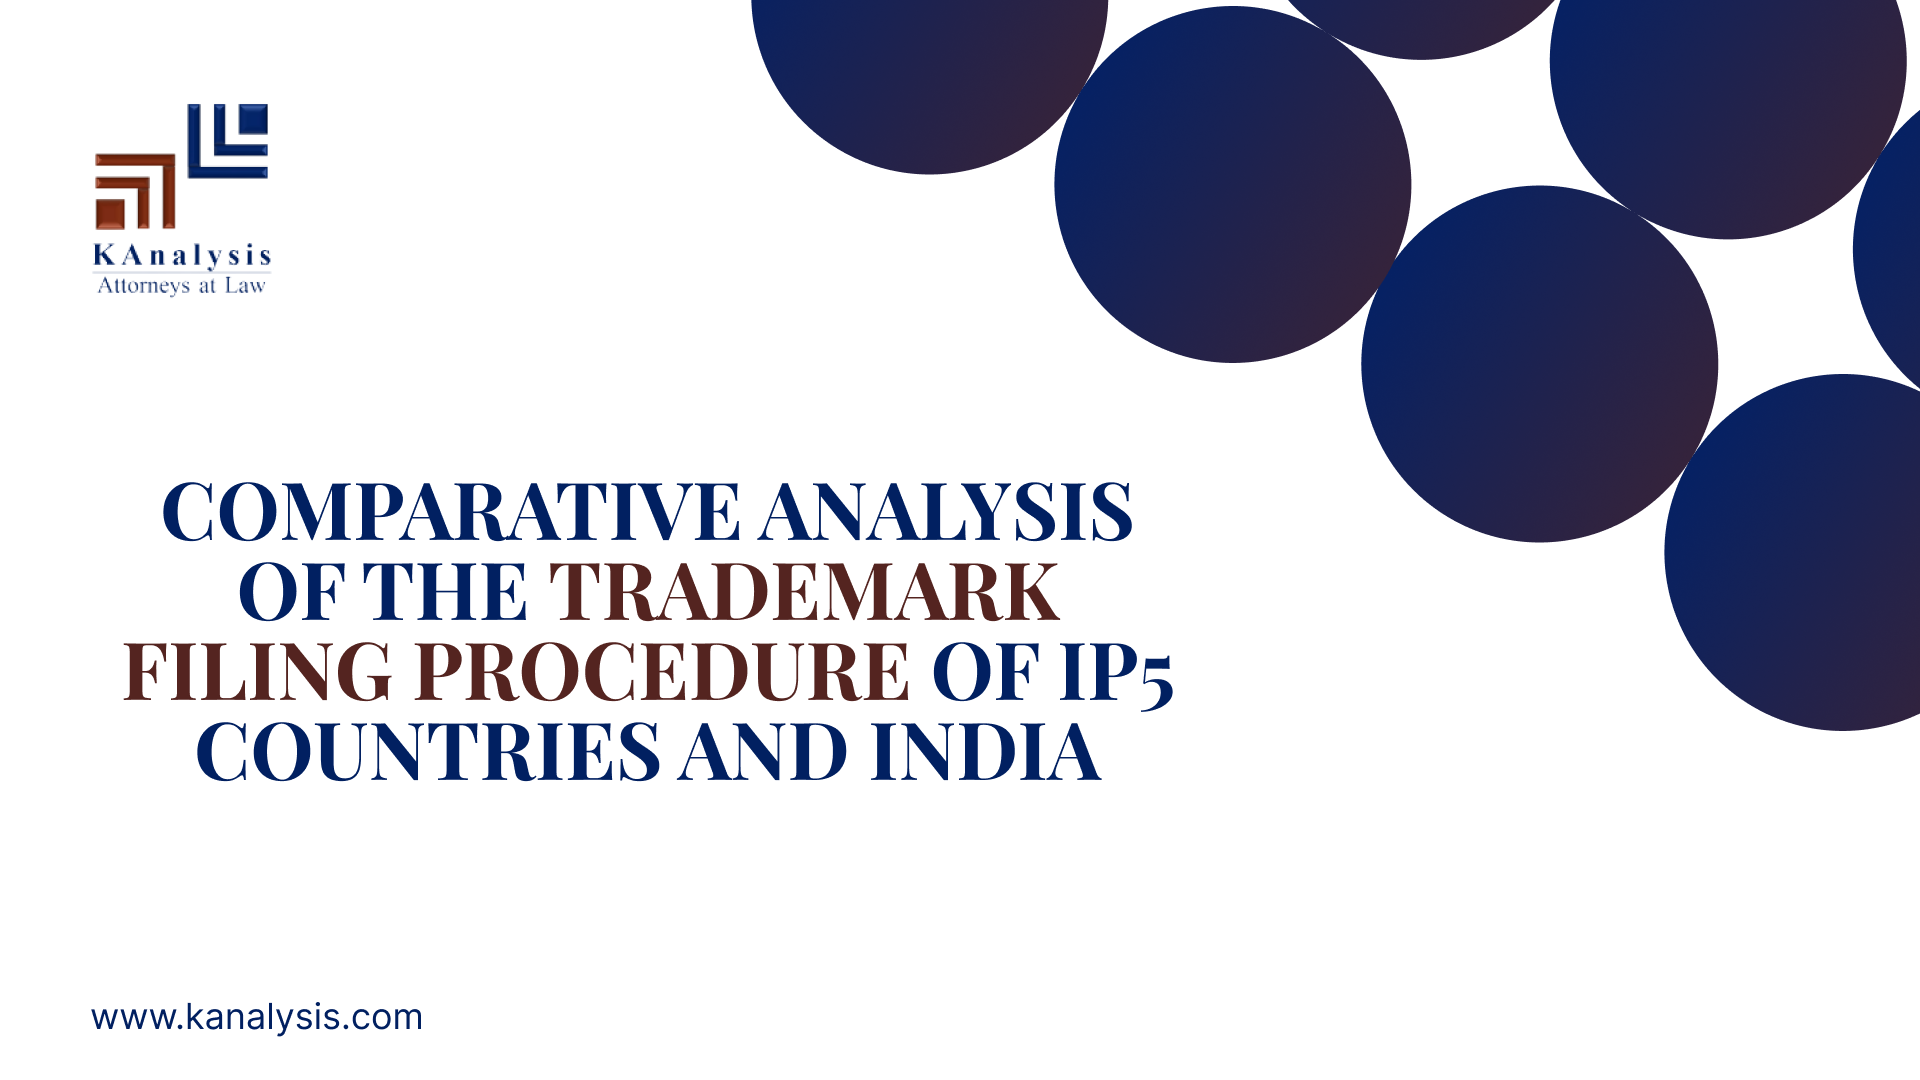 You are currently viewing COMPARATIVE ANALYSIS OF THE TRADEMARK FILING PROCEDURE OF IP5 COUNTRIES AND INDIA